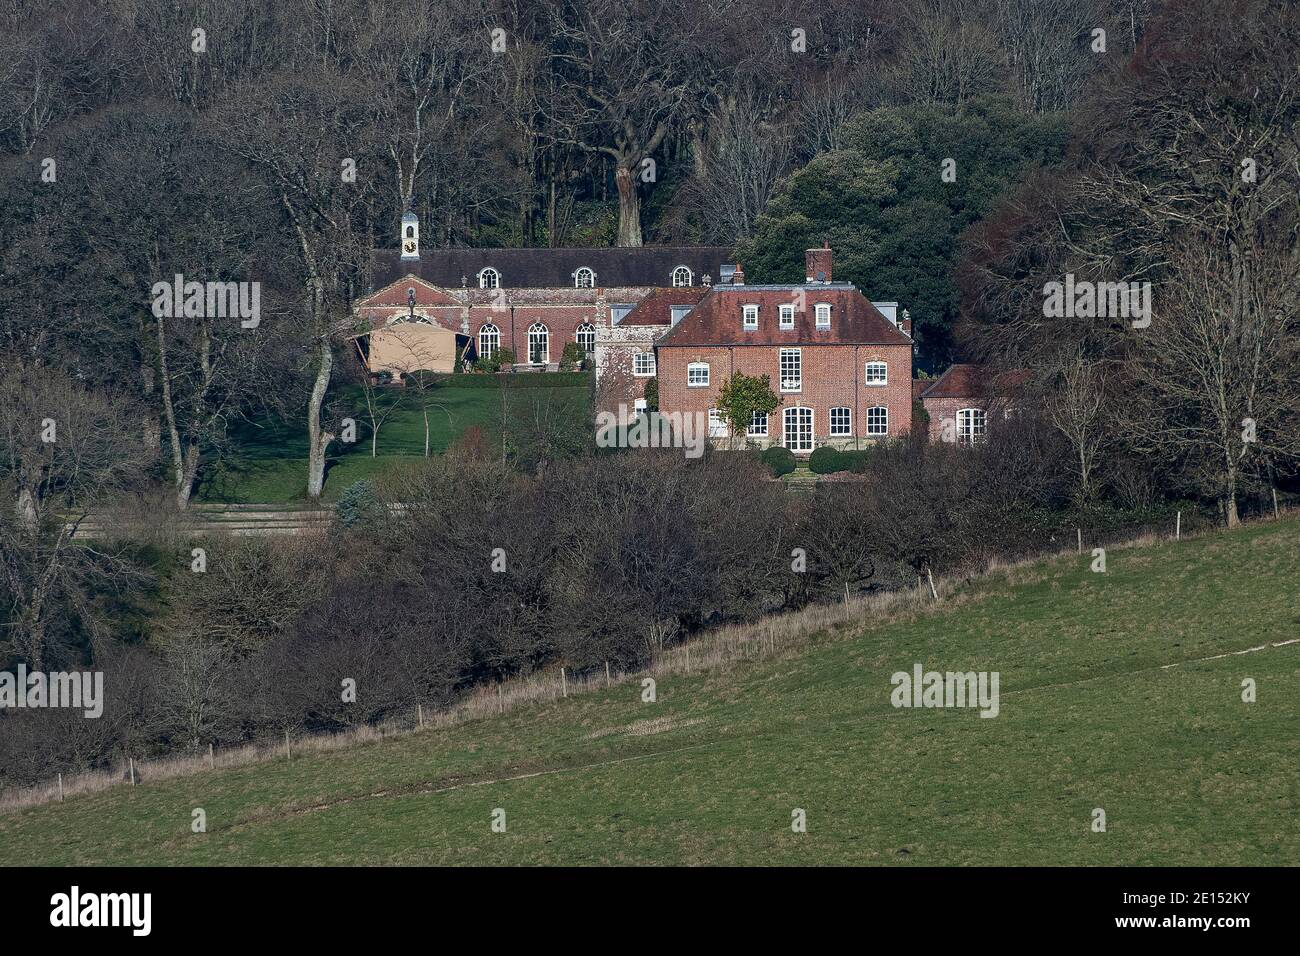 Ashcombe House, also known as Ashcombe Park, is a Georgian manor house the country home of British film director Guy Ritchie in Wiltshire, England. Stock Photo